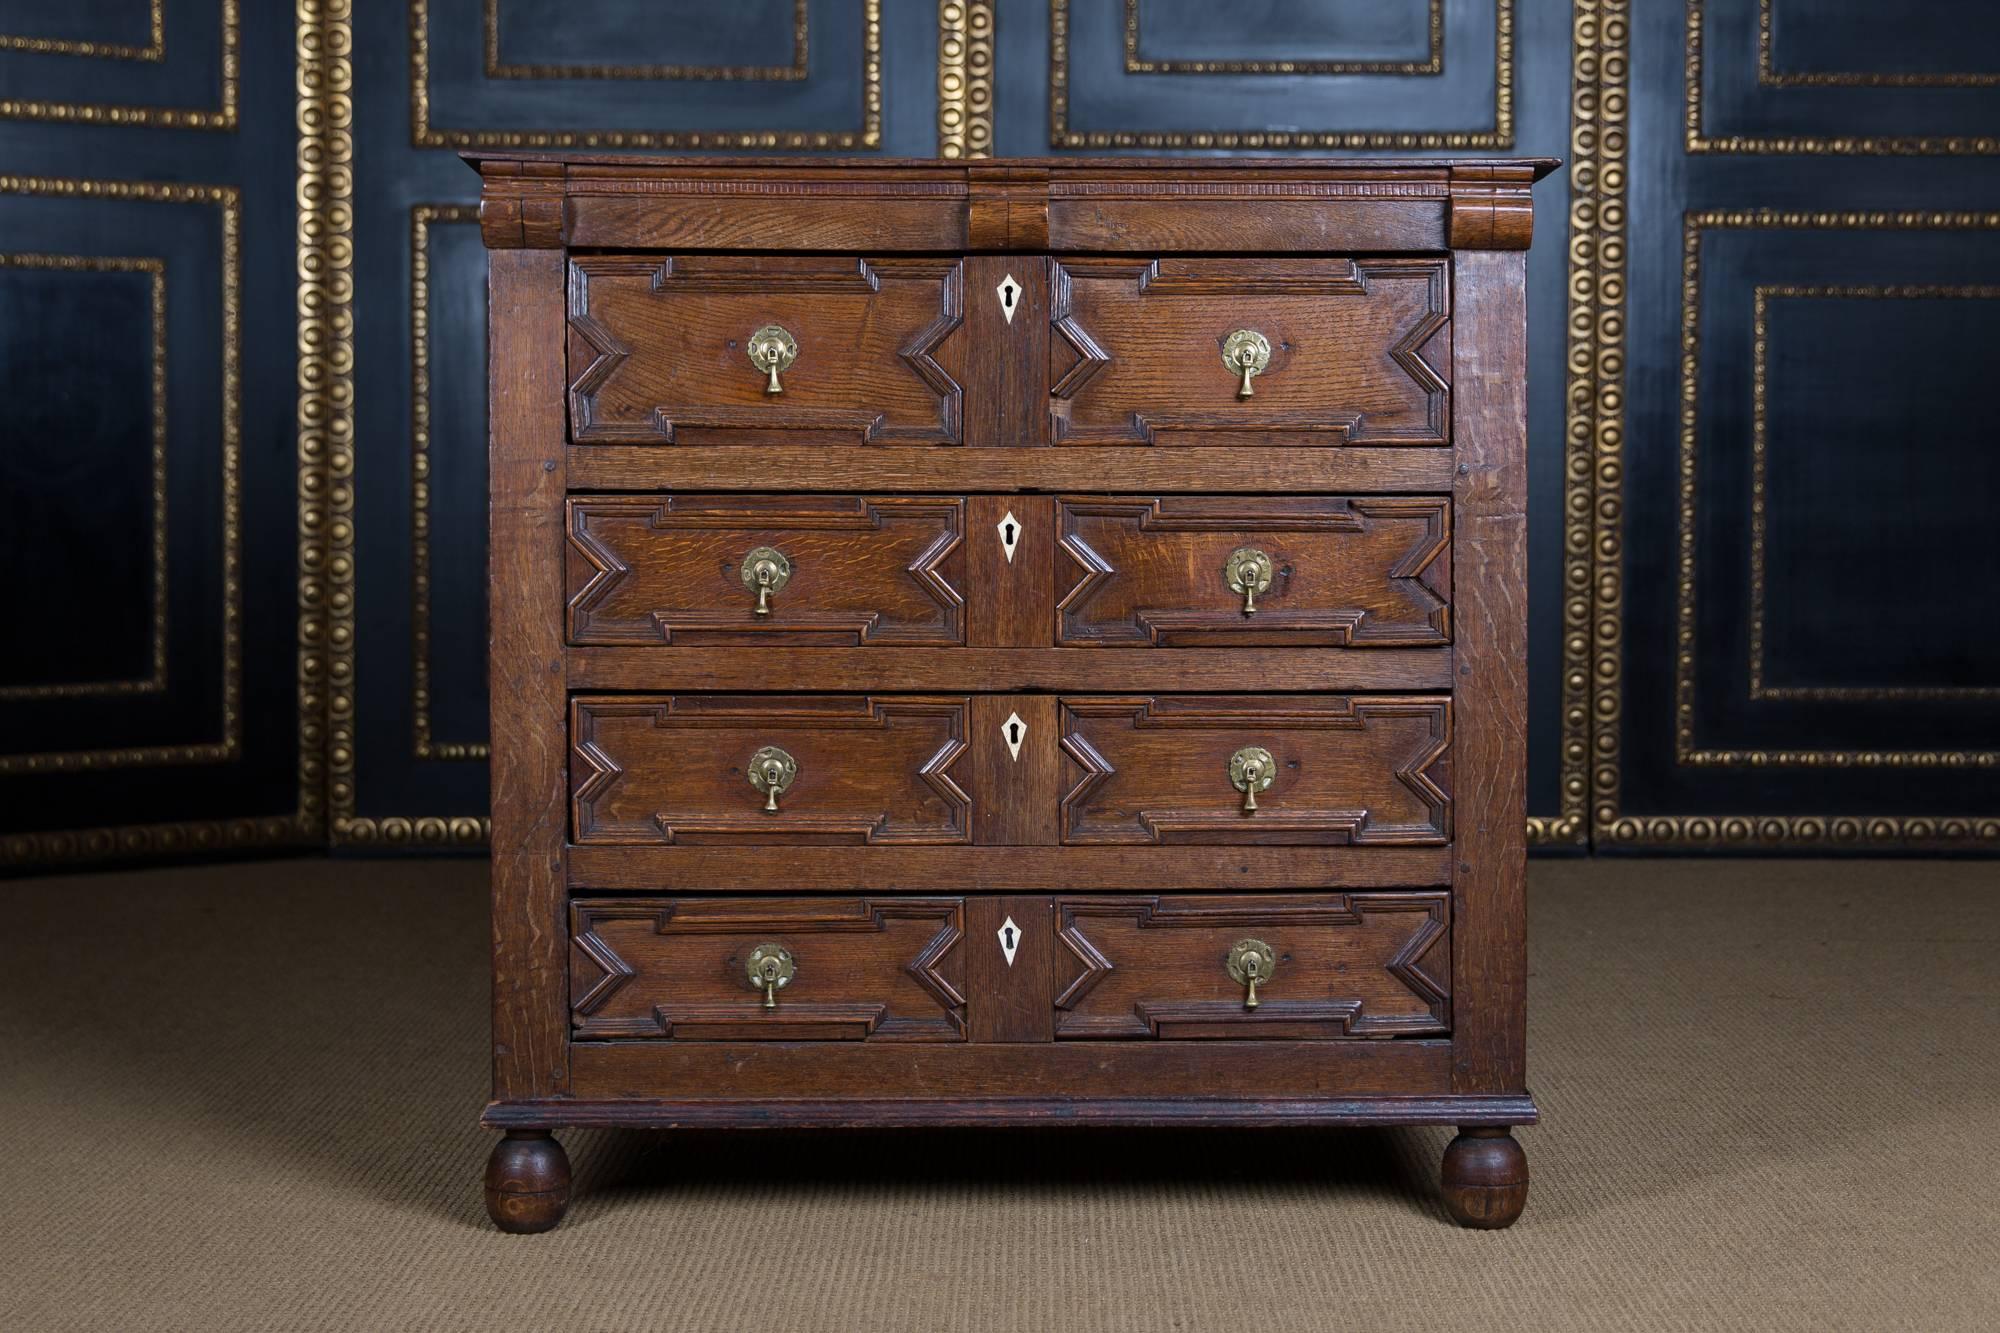 Solid oak. Straight, profile-framed body on round feet. In the front four wide drawers. Slightly overhanging cover plate.

Chest of drawers from the 17th century are extremely rare and difficult to find.

Excellent warm patina aged over decades.